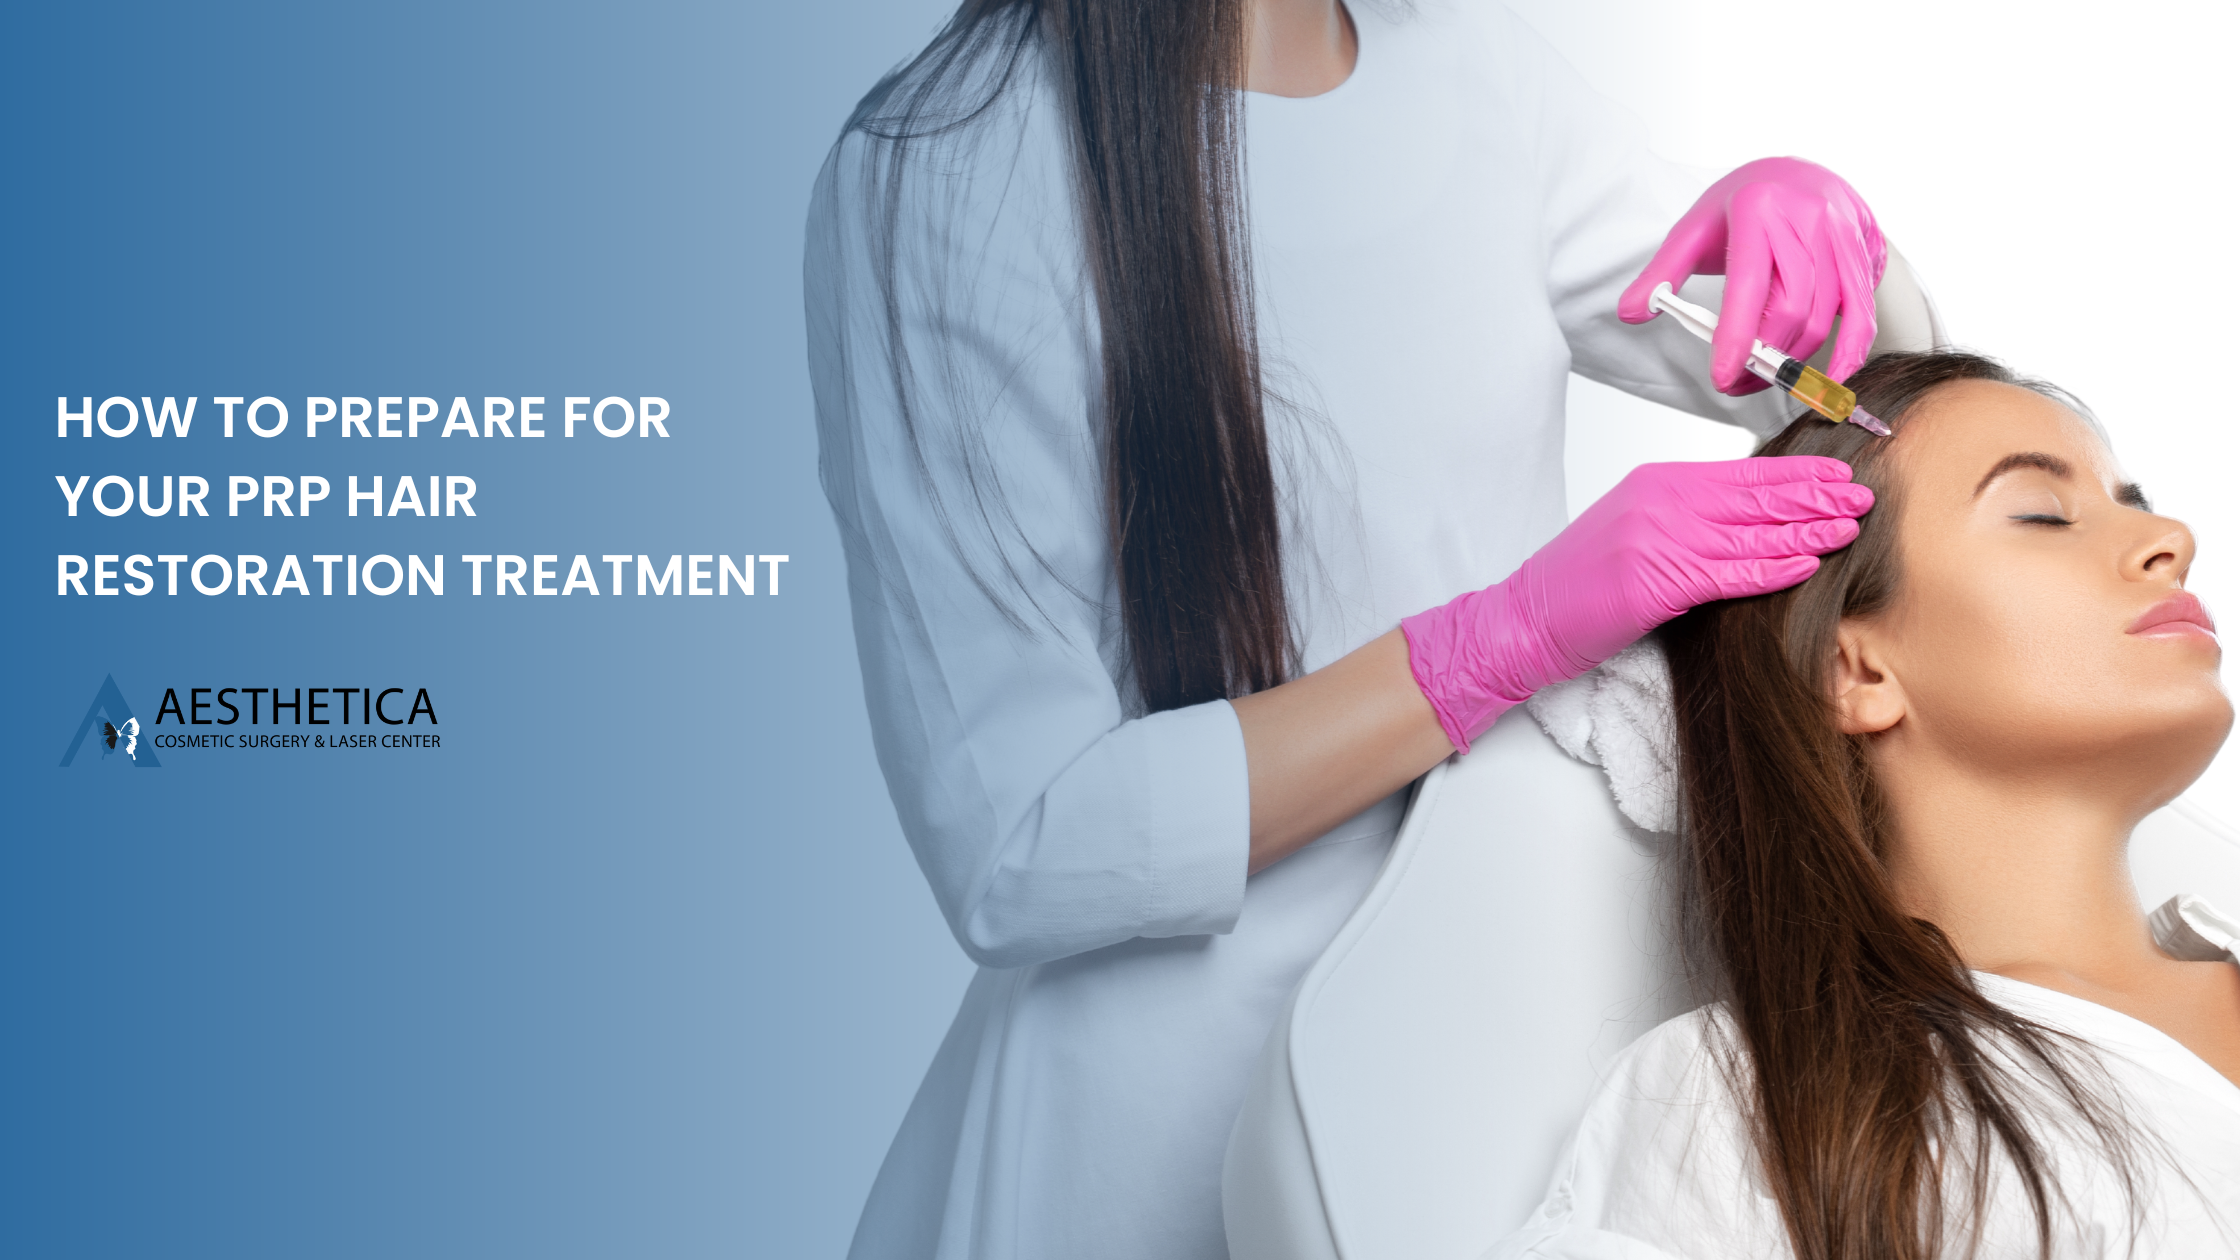 How to Prepare for Your PRP Hair Restoration Treatment